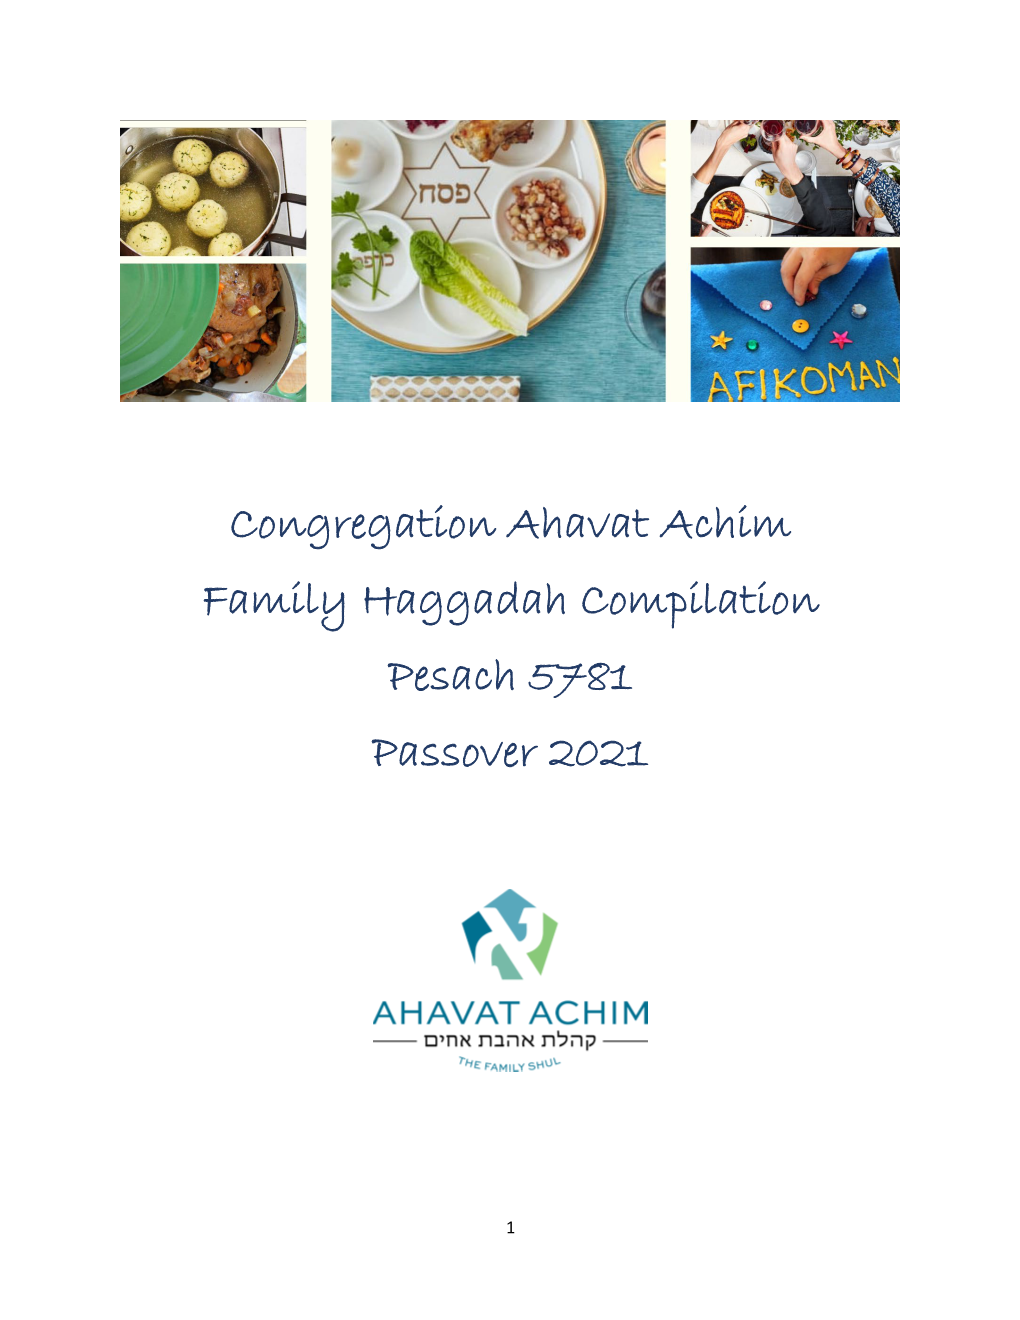 Family Haggadah Project March 2021